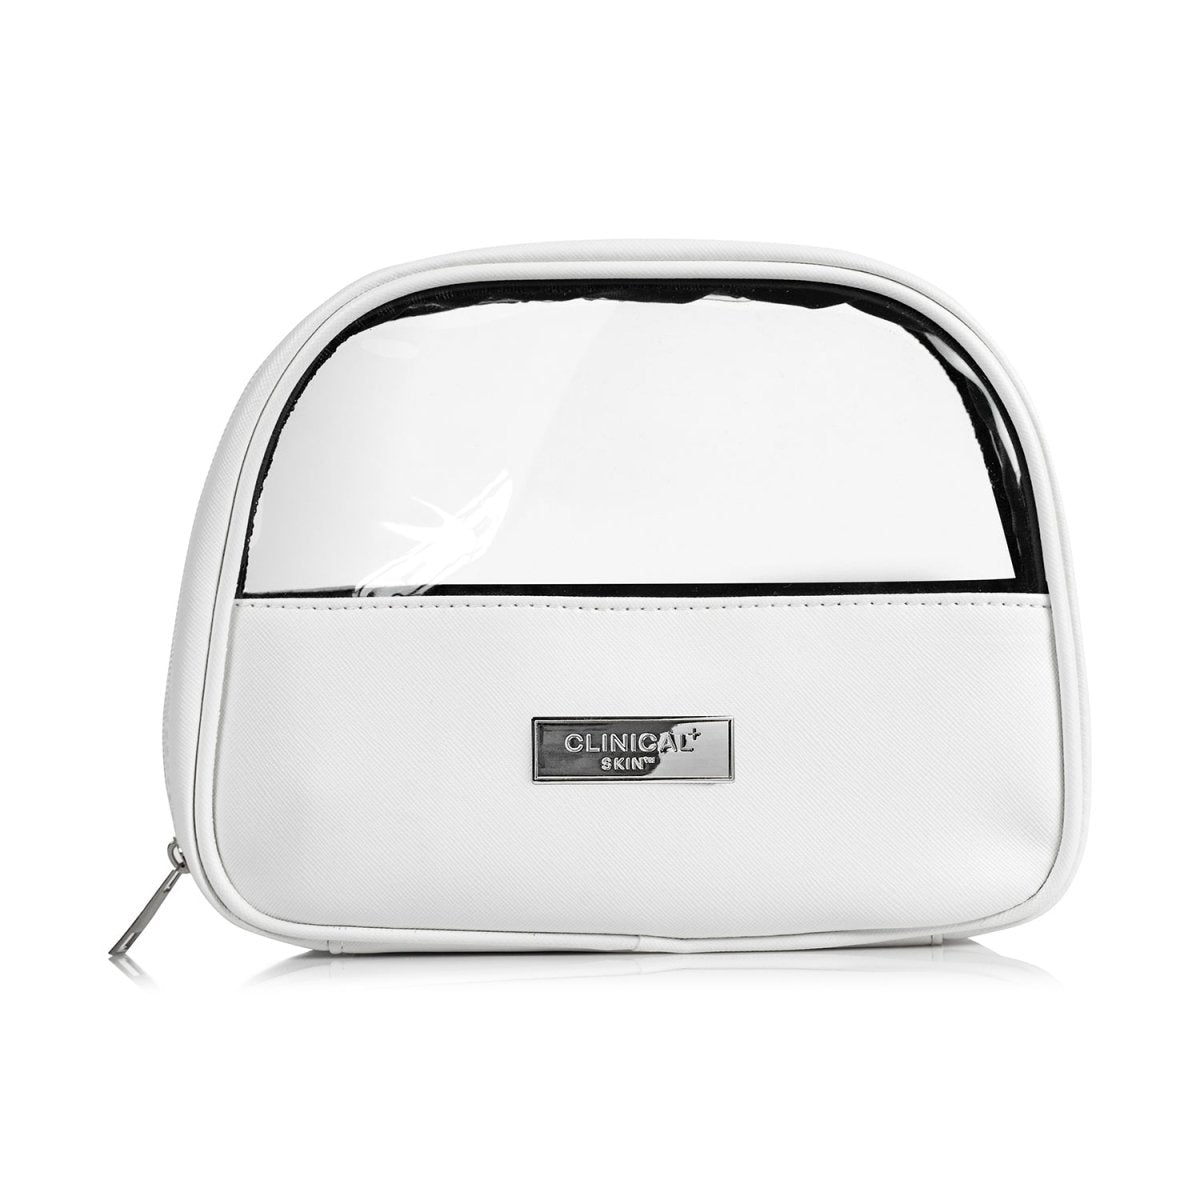 Clinical Skin Windowed Carry-All Cosmetic Case - SkincareEssentials